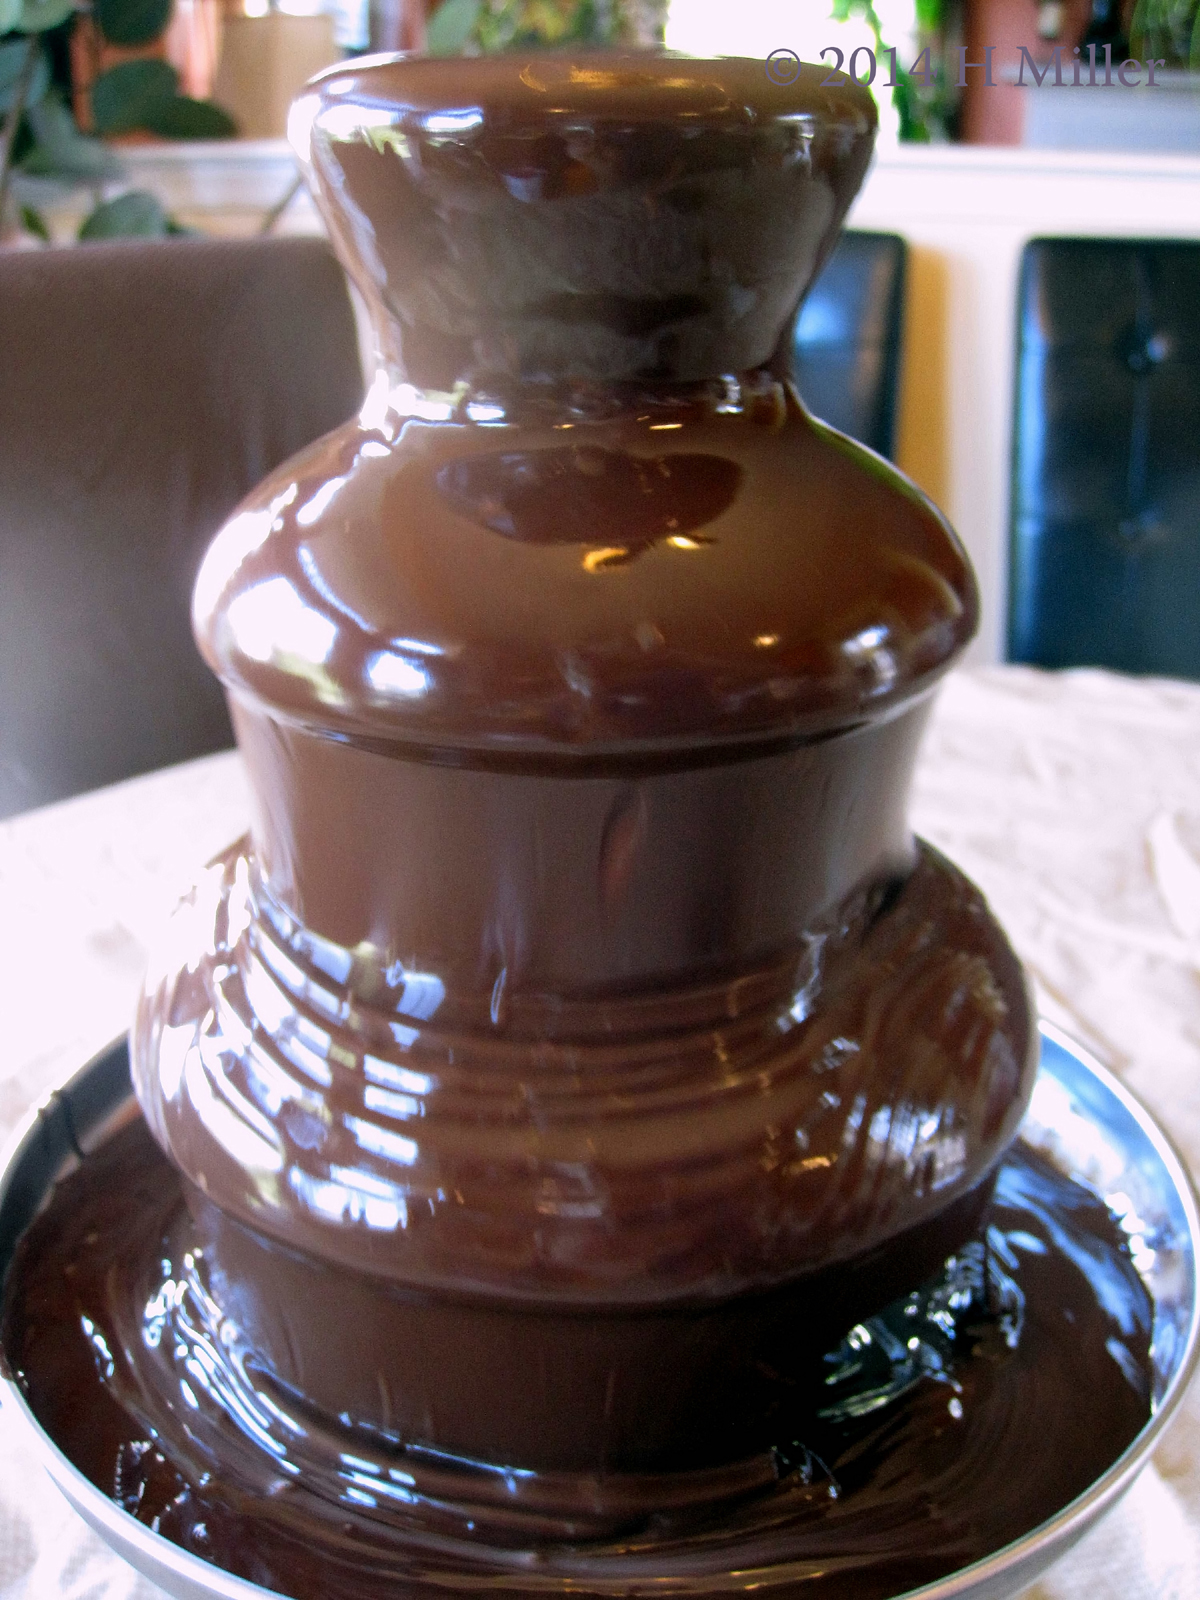 Chocolate Fountain Looking Quite Good!